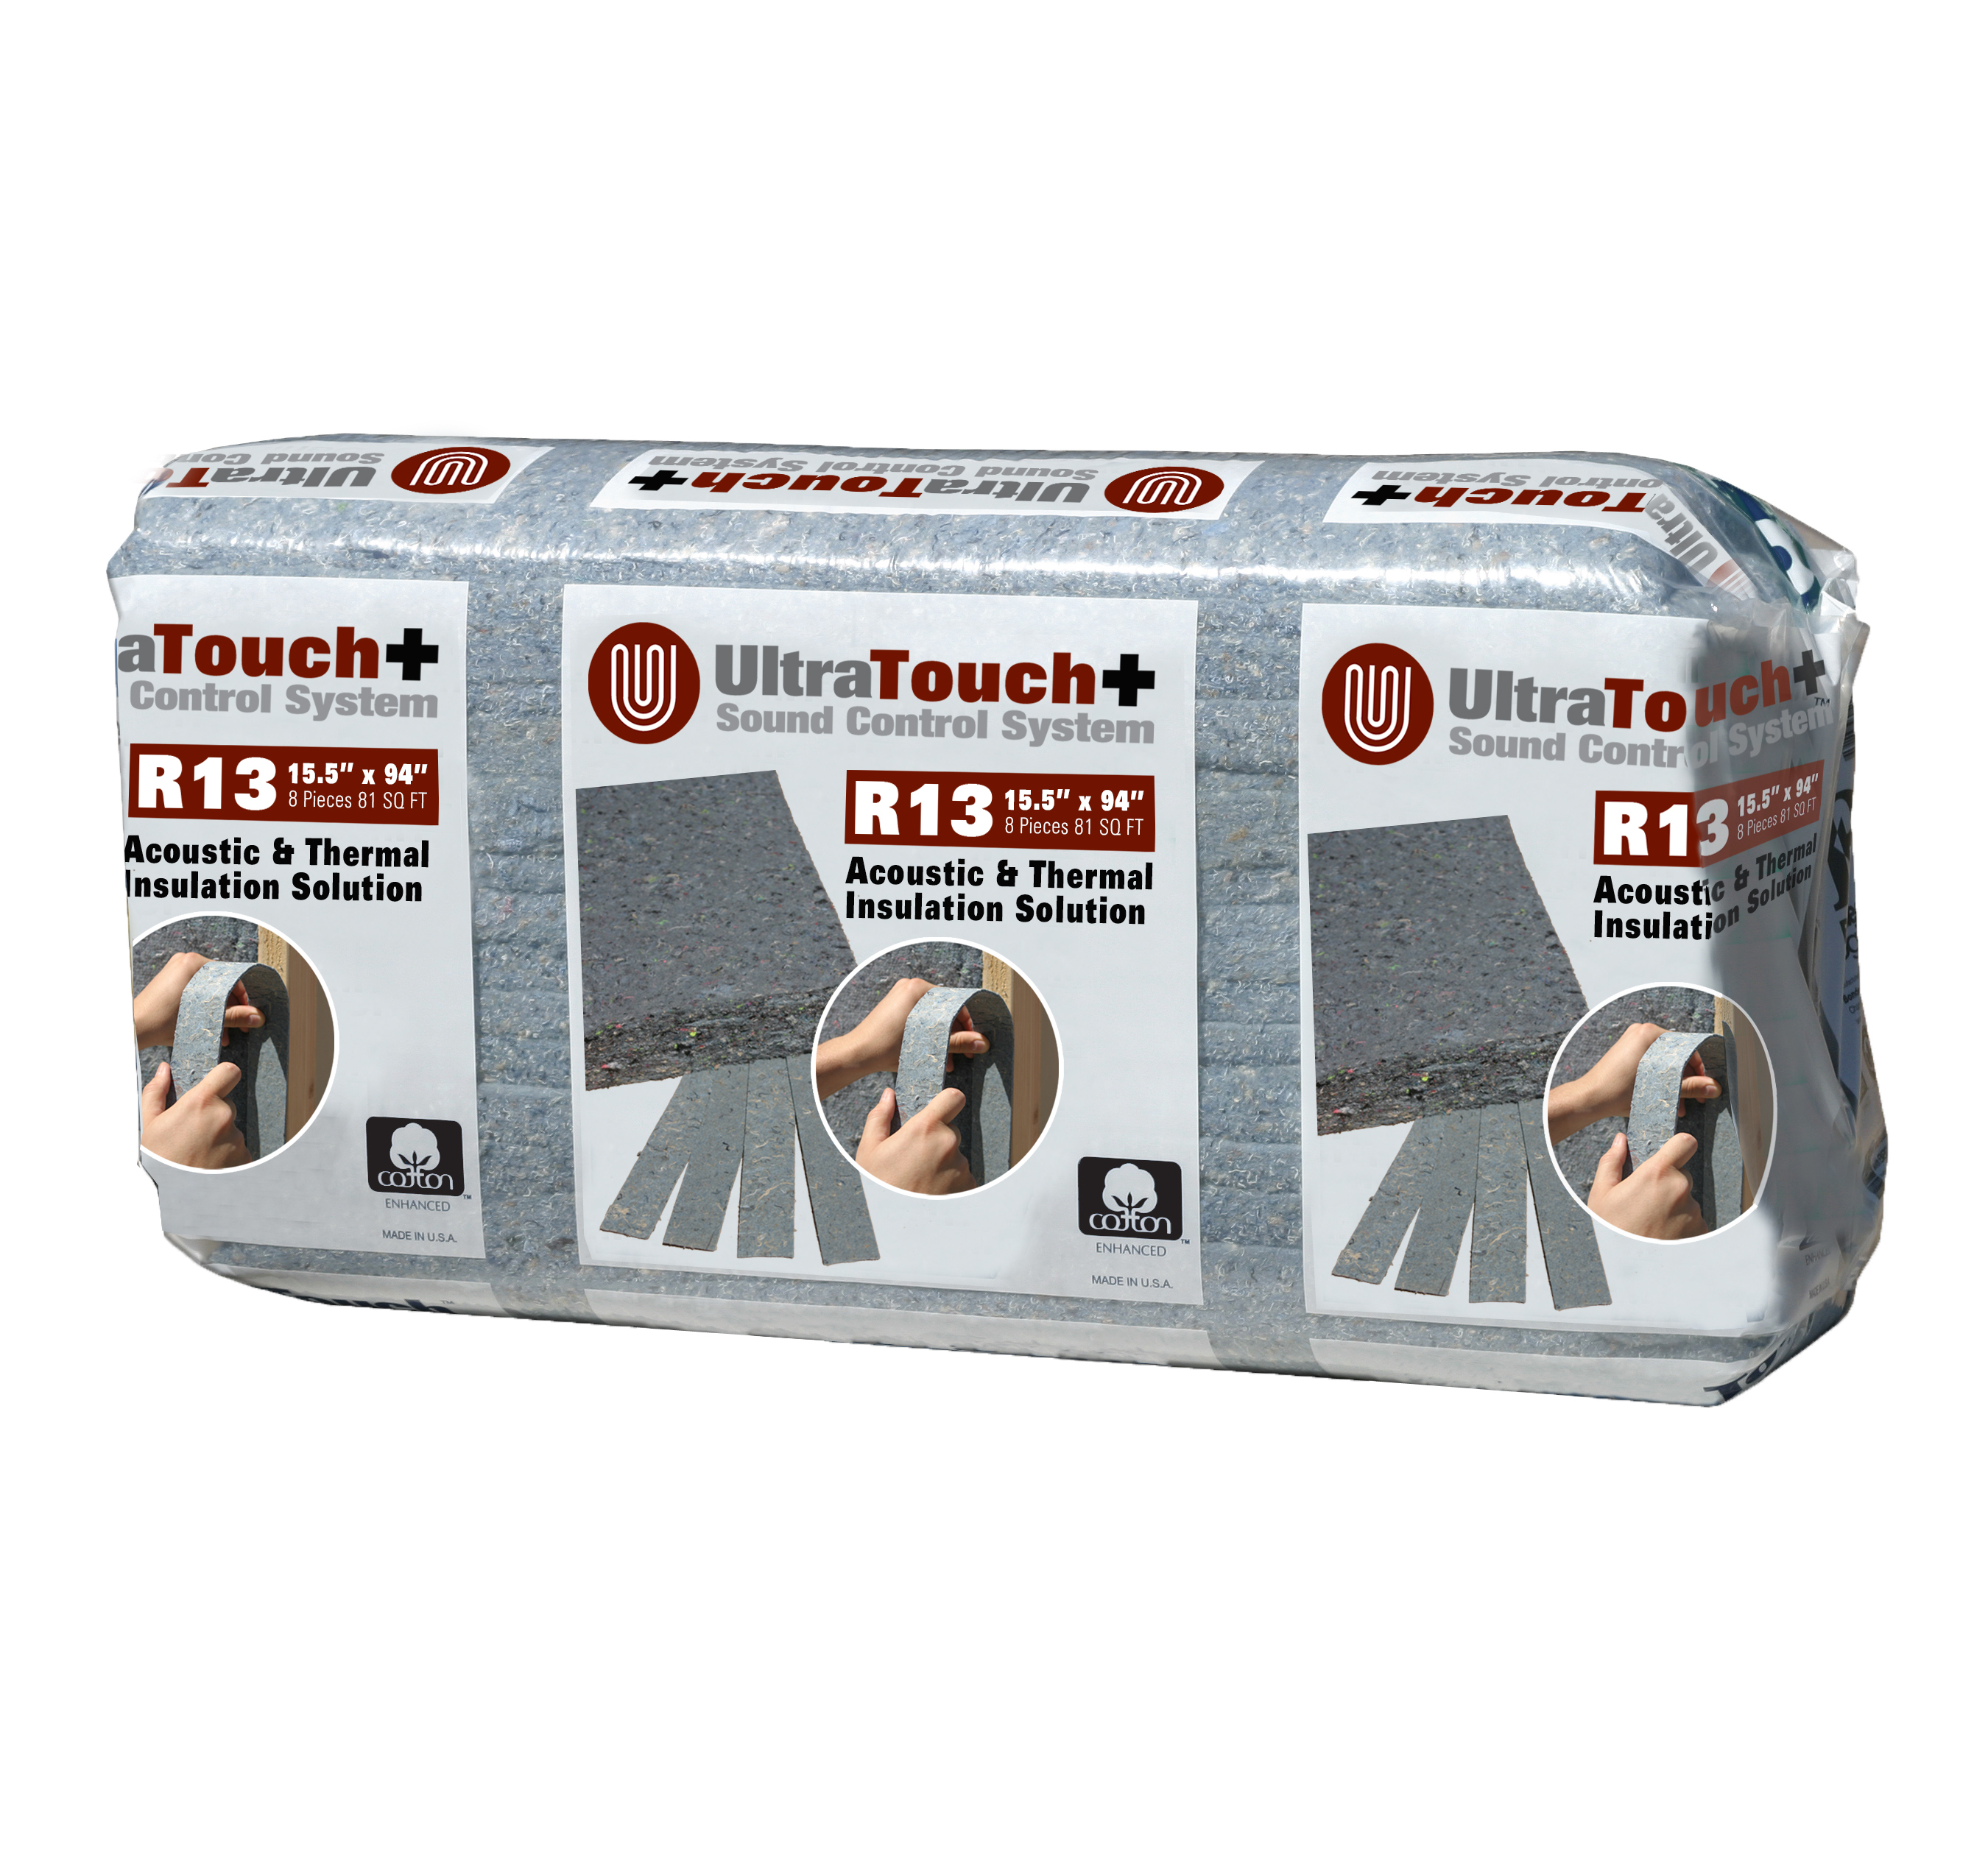 UltraTouch Packaging Aug 2013